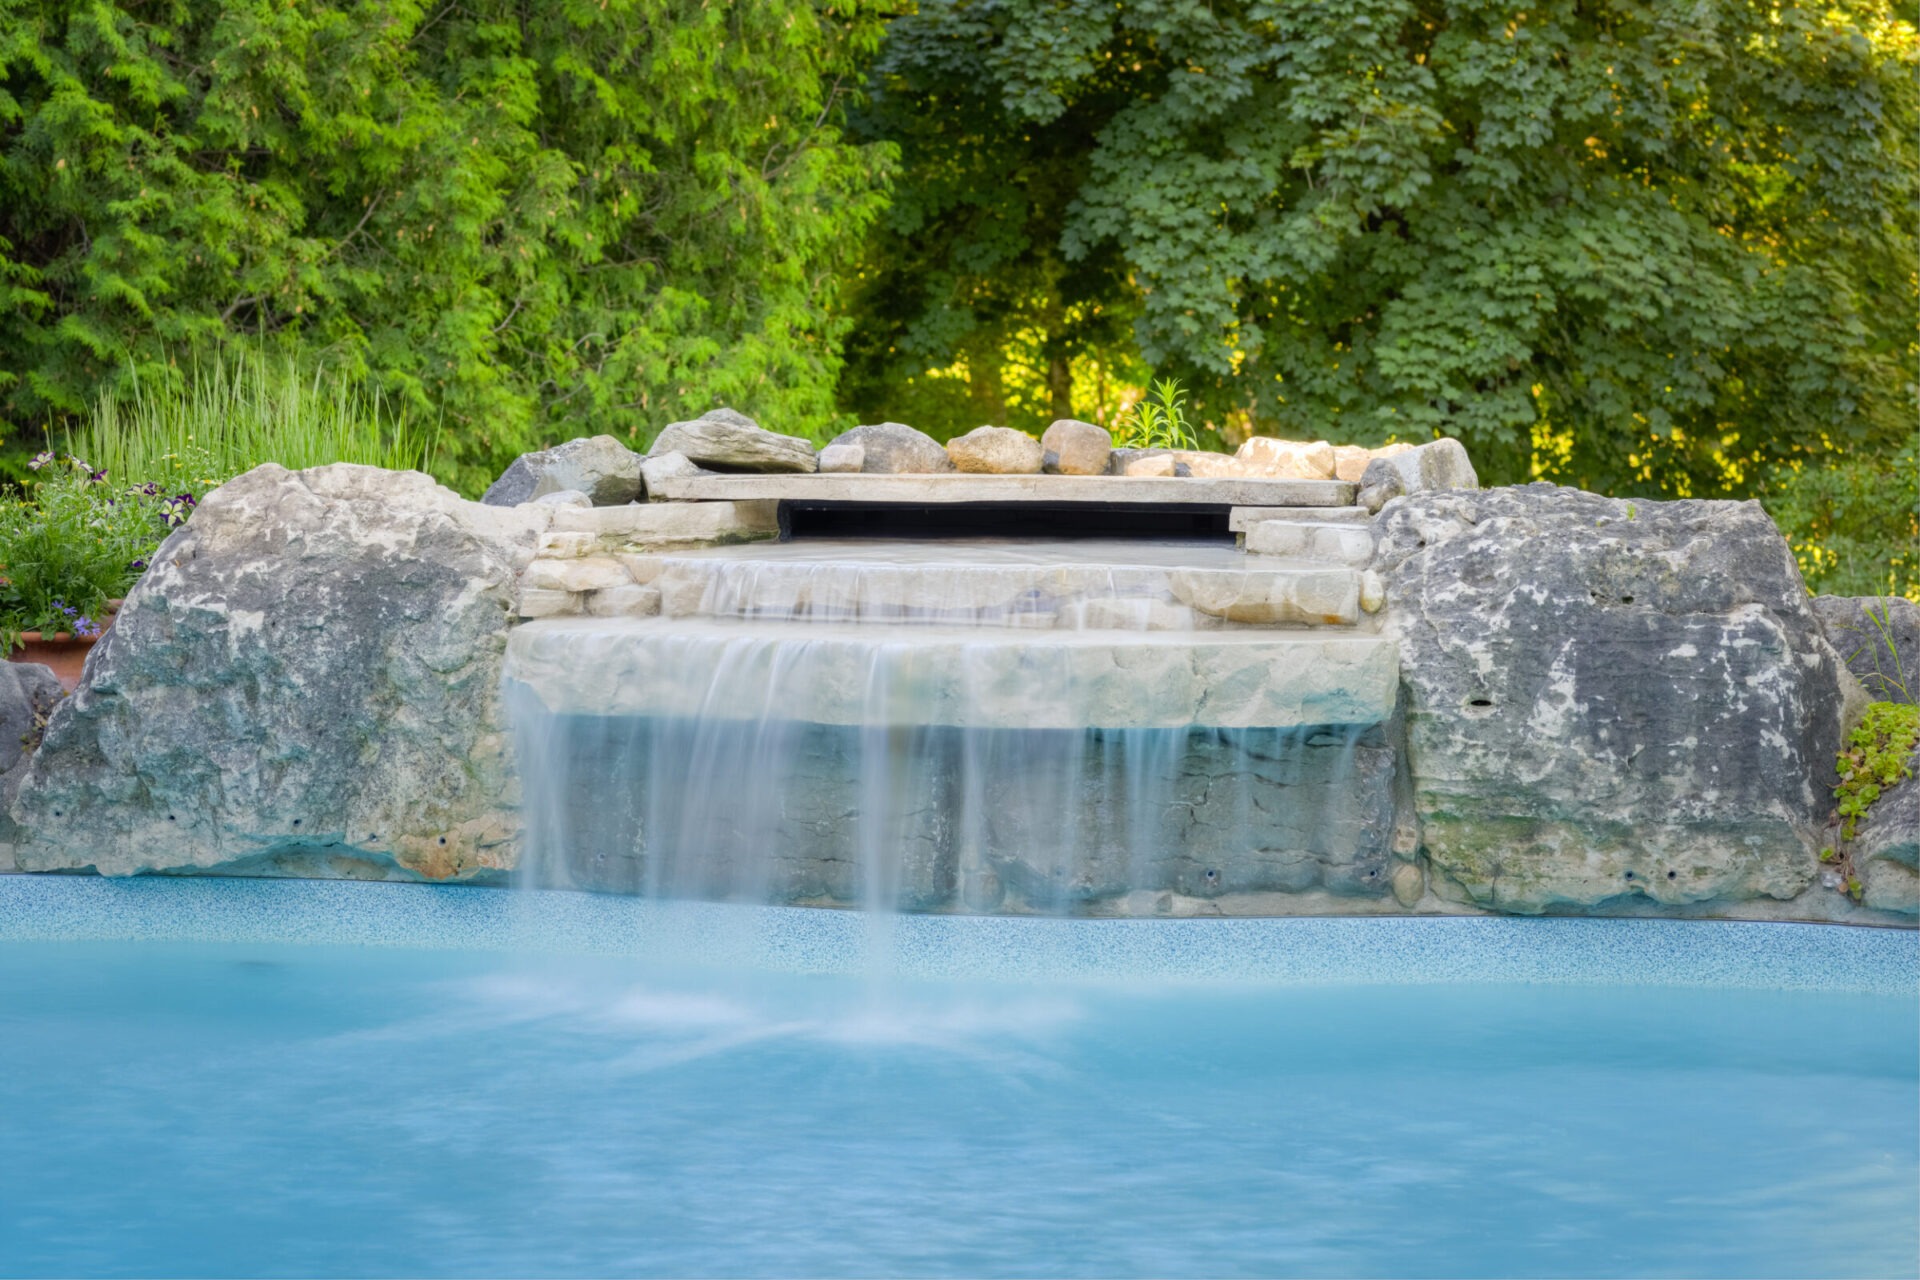 This image shows a serene pool with a built-in waterfall surrounded by natural rocks and lush green trees, evoking a tranquil, landscaped garden atmosphere.